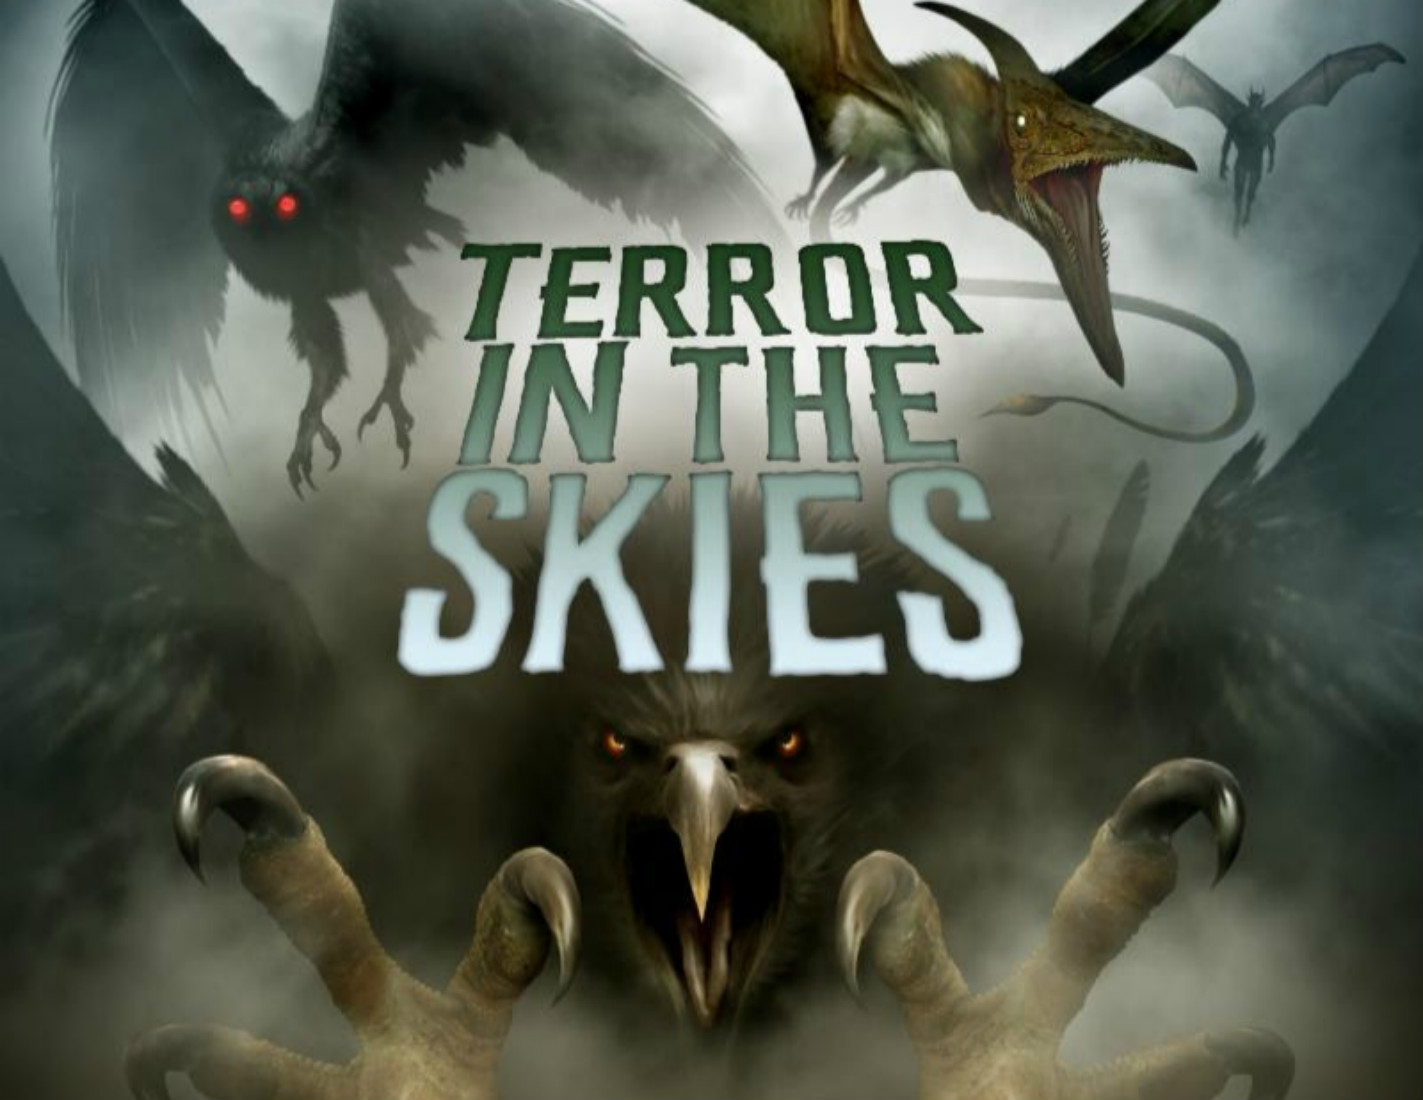 'Terror in the Skies' review: airborne cryptozoology for fun, but not rigor